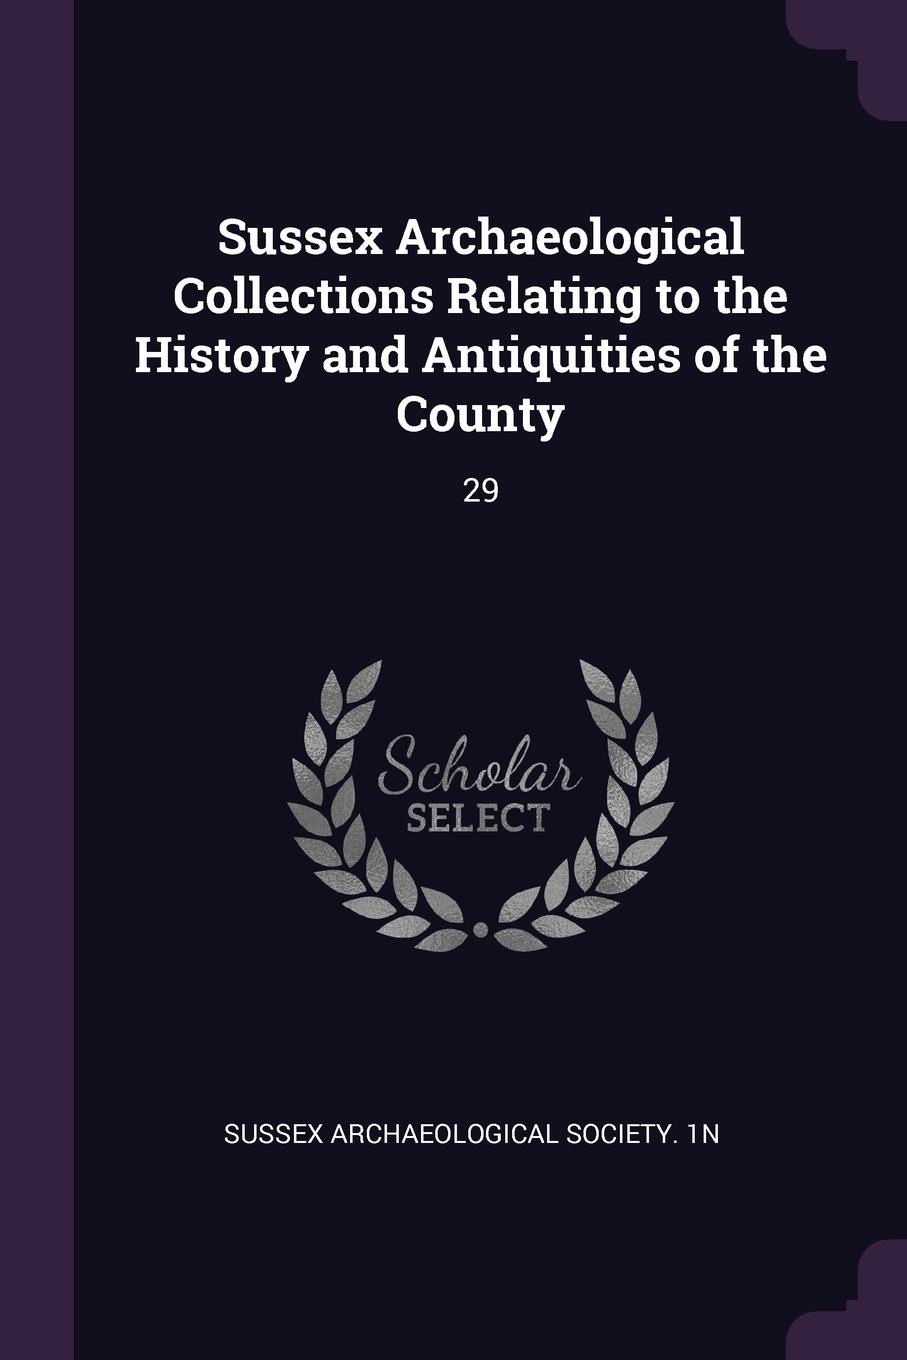 Related collections